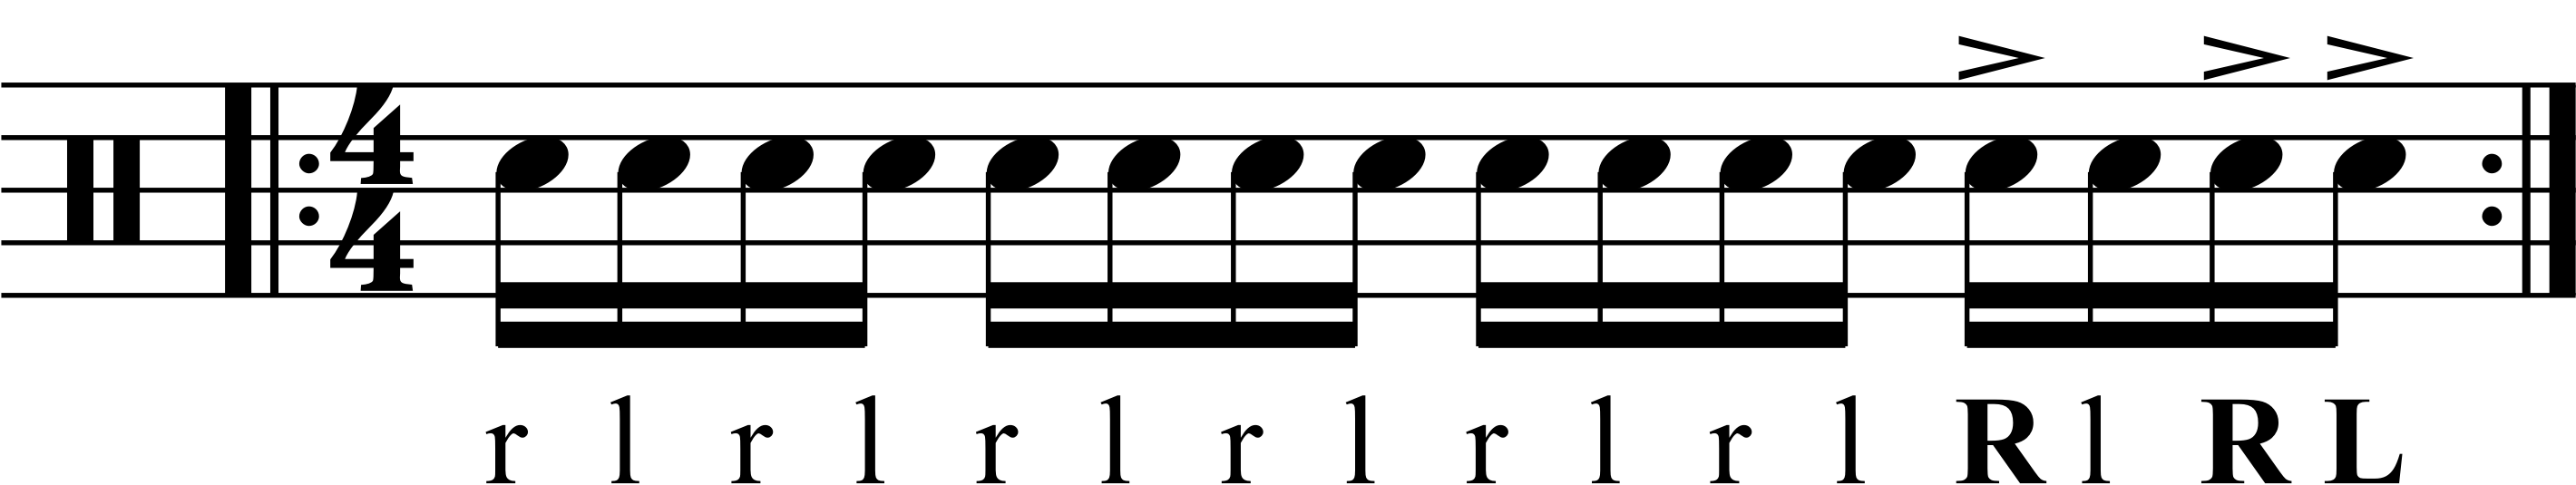 Sixteenth note grouping accent in a single stroke roll